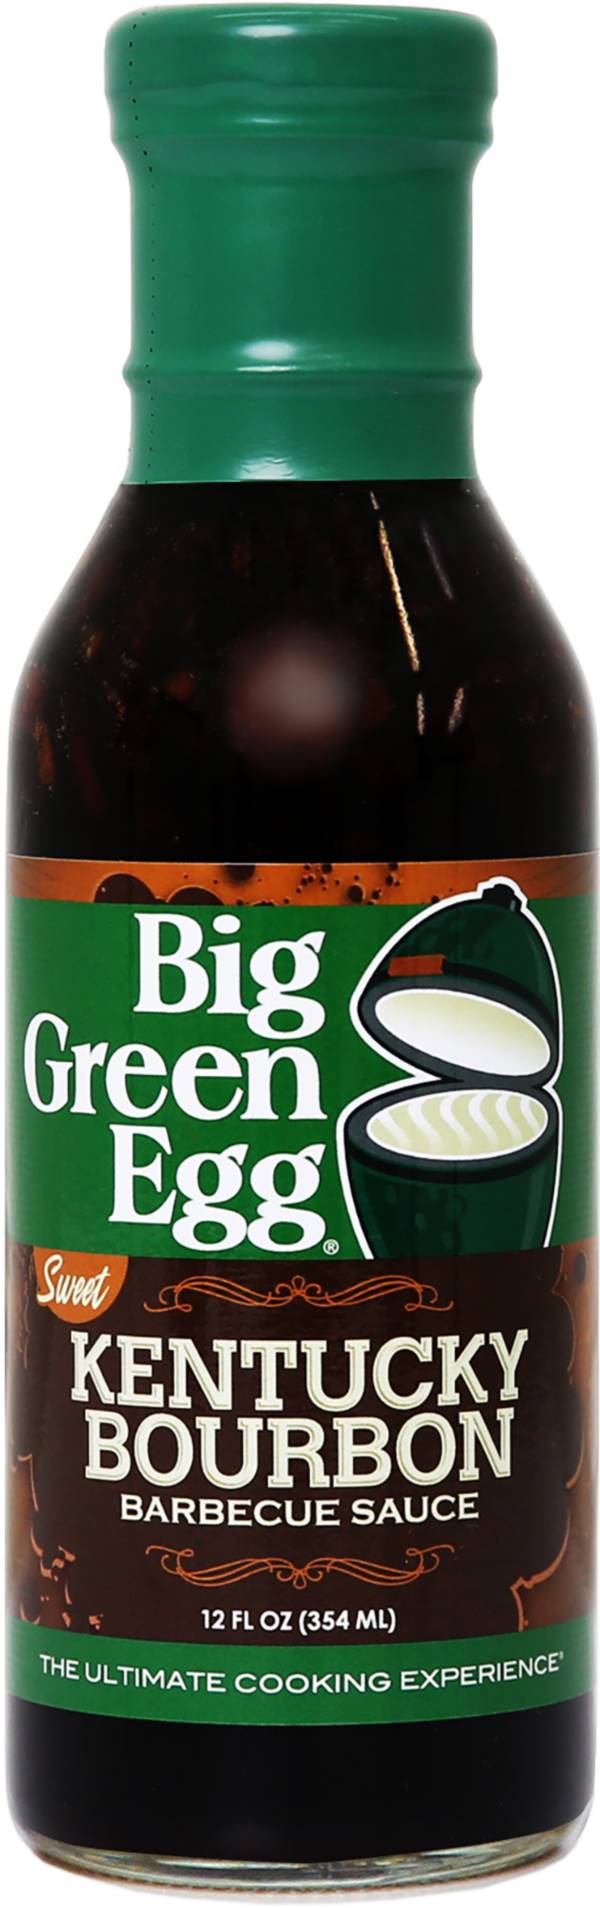 Big Green Egg Sweet Kentucky Bourbon Grilling Barbecue Glaze product image